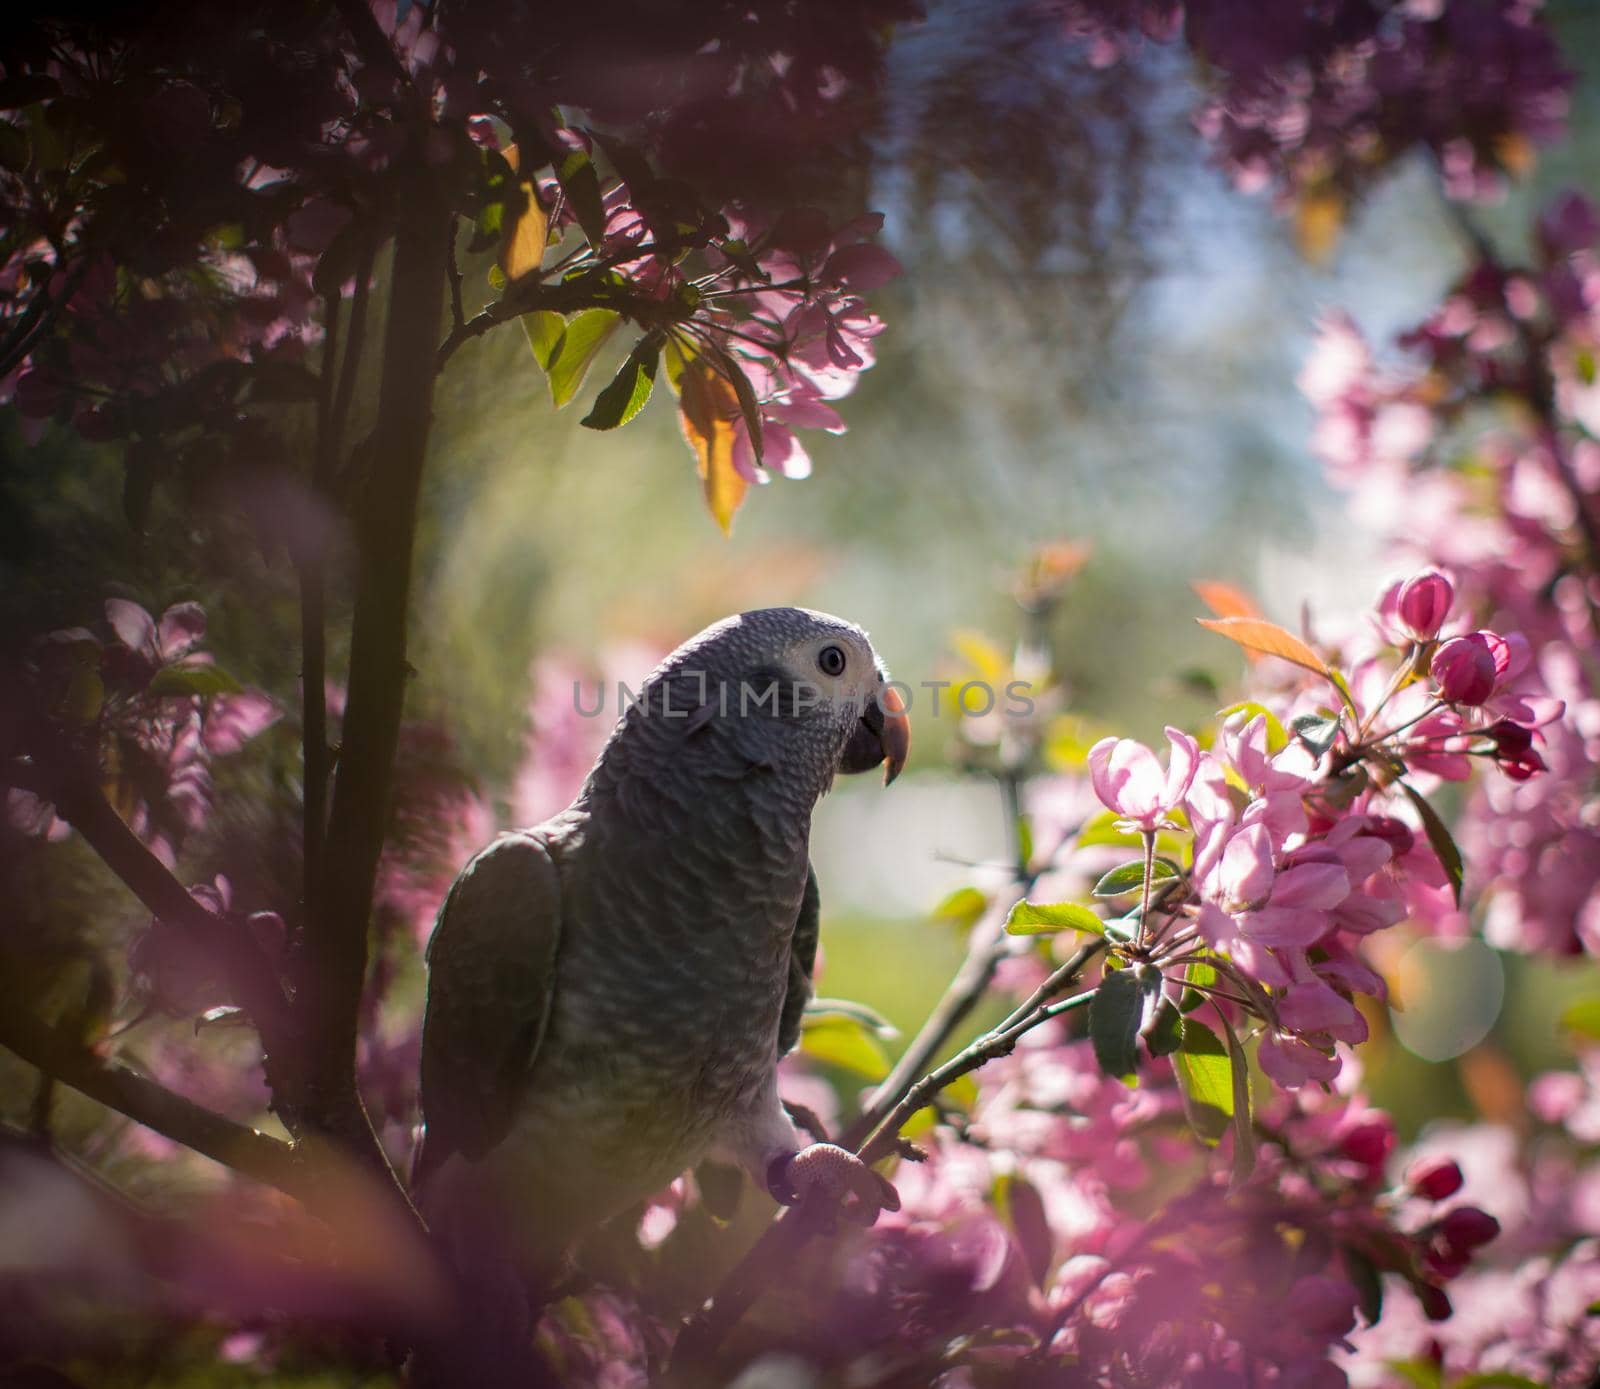 African Grey Parrot, Psittacus erithacus timneh, on the apple tree in spring garden